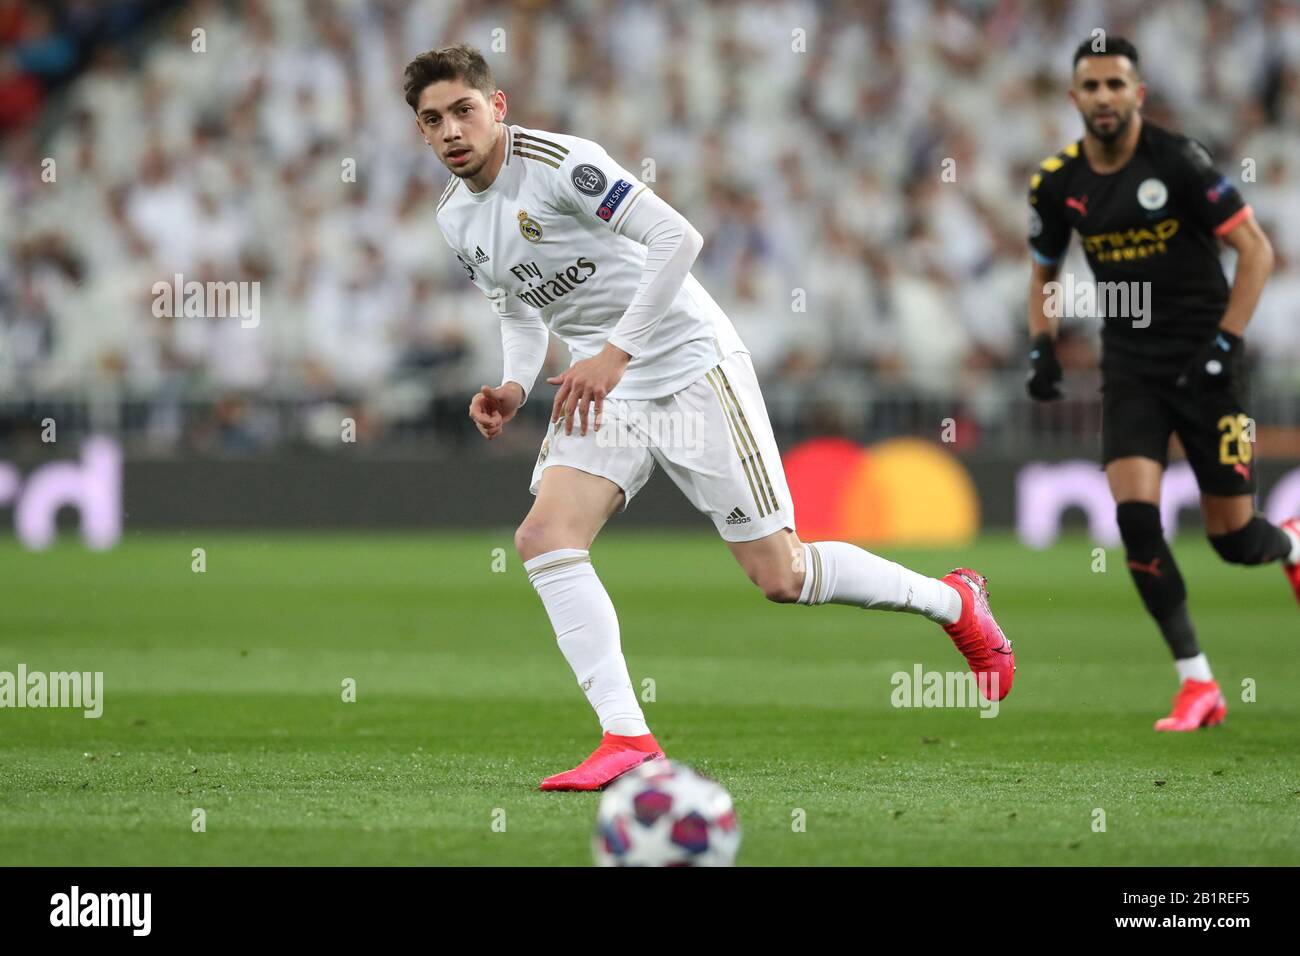 Madrid, Spain. 26th Feb, 2020. MADRID, SPAIN - 26 FEBRUARY: Federico Valverde of Real Madrid CF during the UEFA Champions League, round of 16, 1st leg football match between Real Madrid CF and Manchester City on February 26, 2020 at Santiago Bernabeu stadium in Madrid, Spain Credit: Manuel Blondeau/ZUMA Wire/Alamy Live News Stock Photo